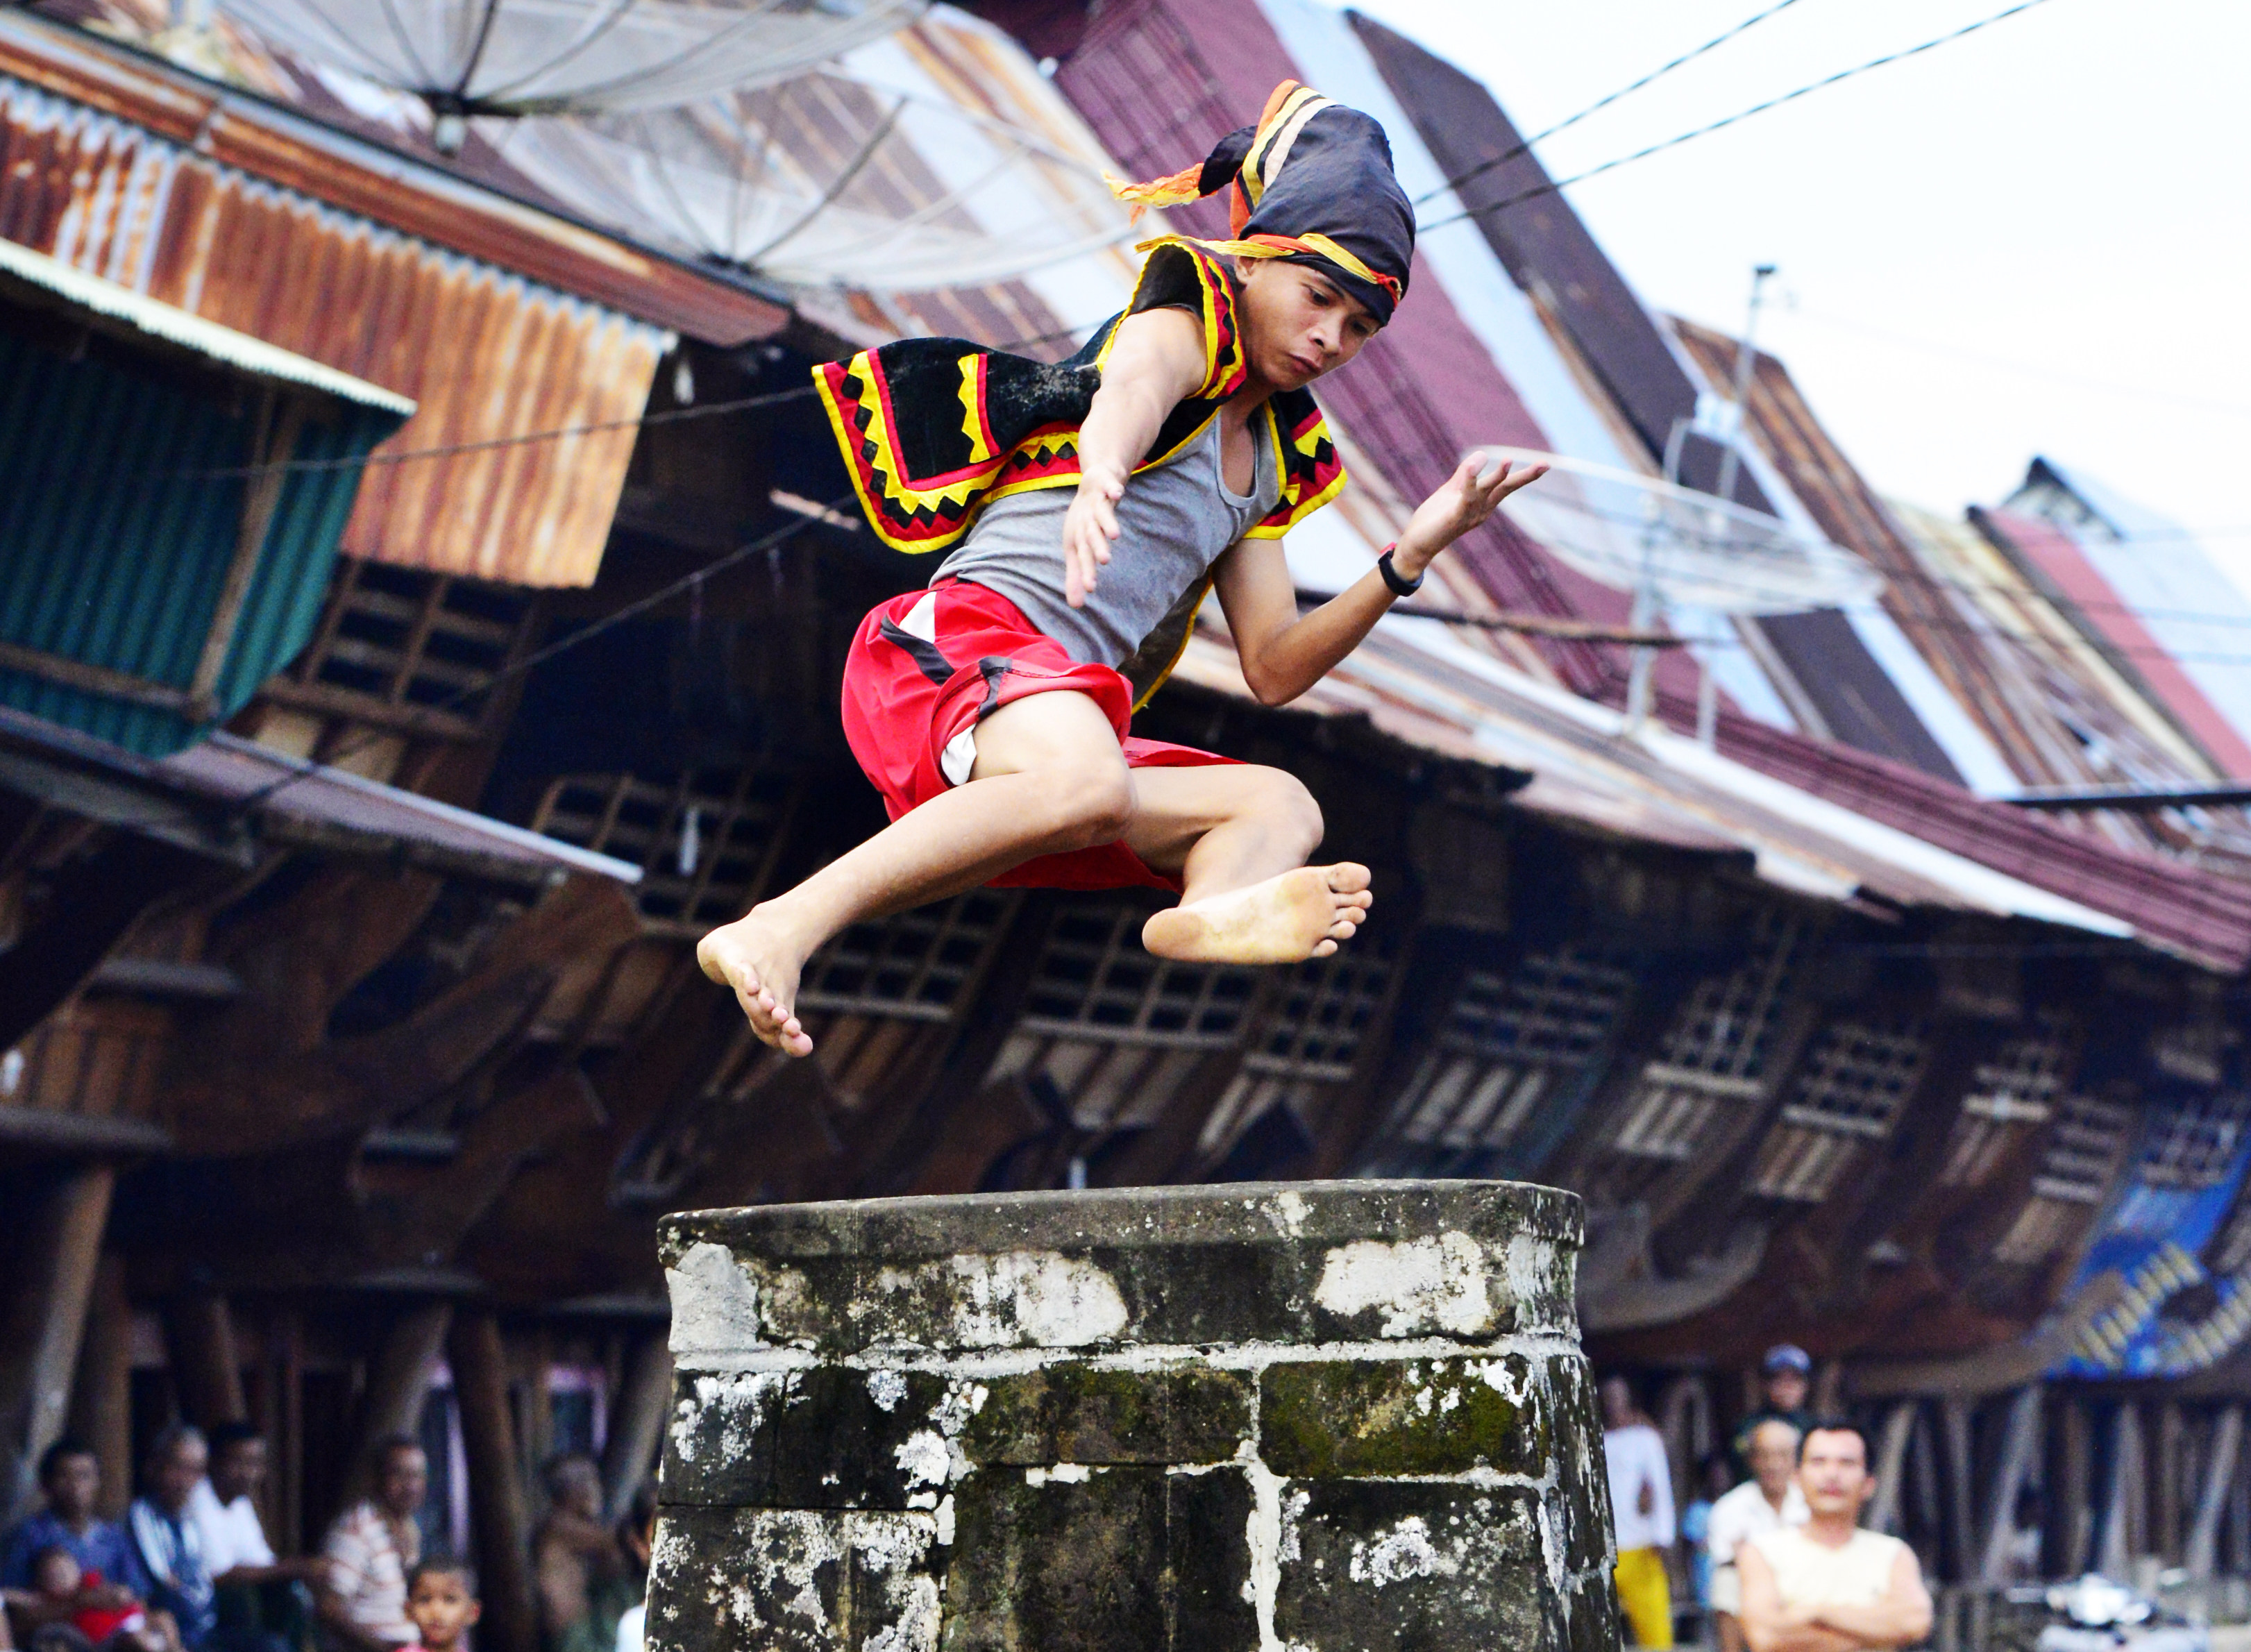 On the Indonesian island of Nias, young villagers jump over a stone pillar two metres tall. It is an example of the wealth of traditional cultures to be found beyond Bali and Java. Photo: Mark Eveleigh